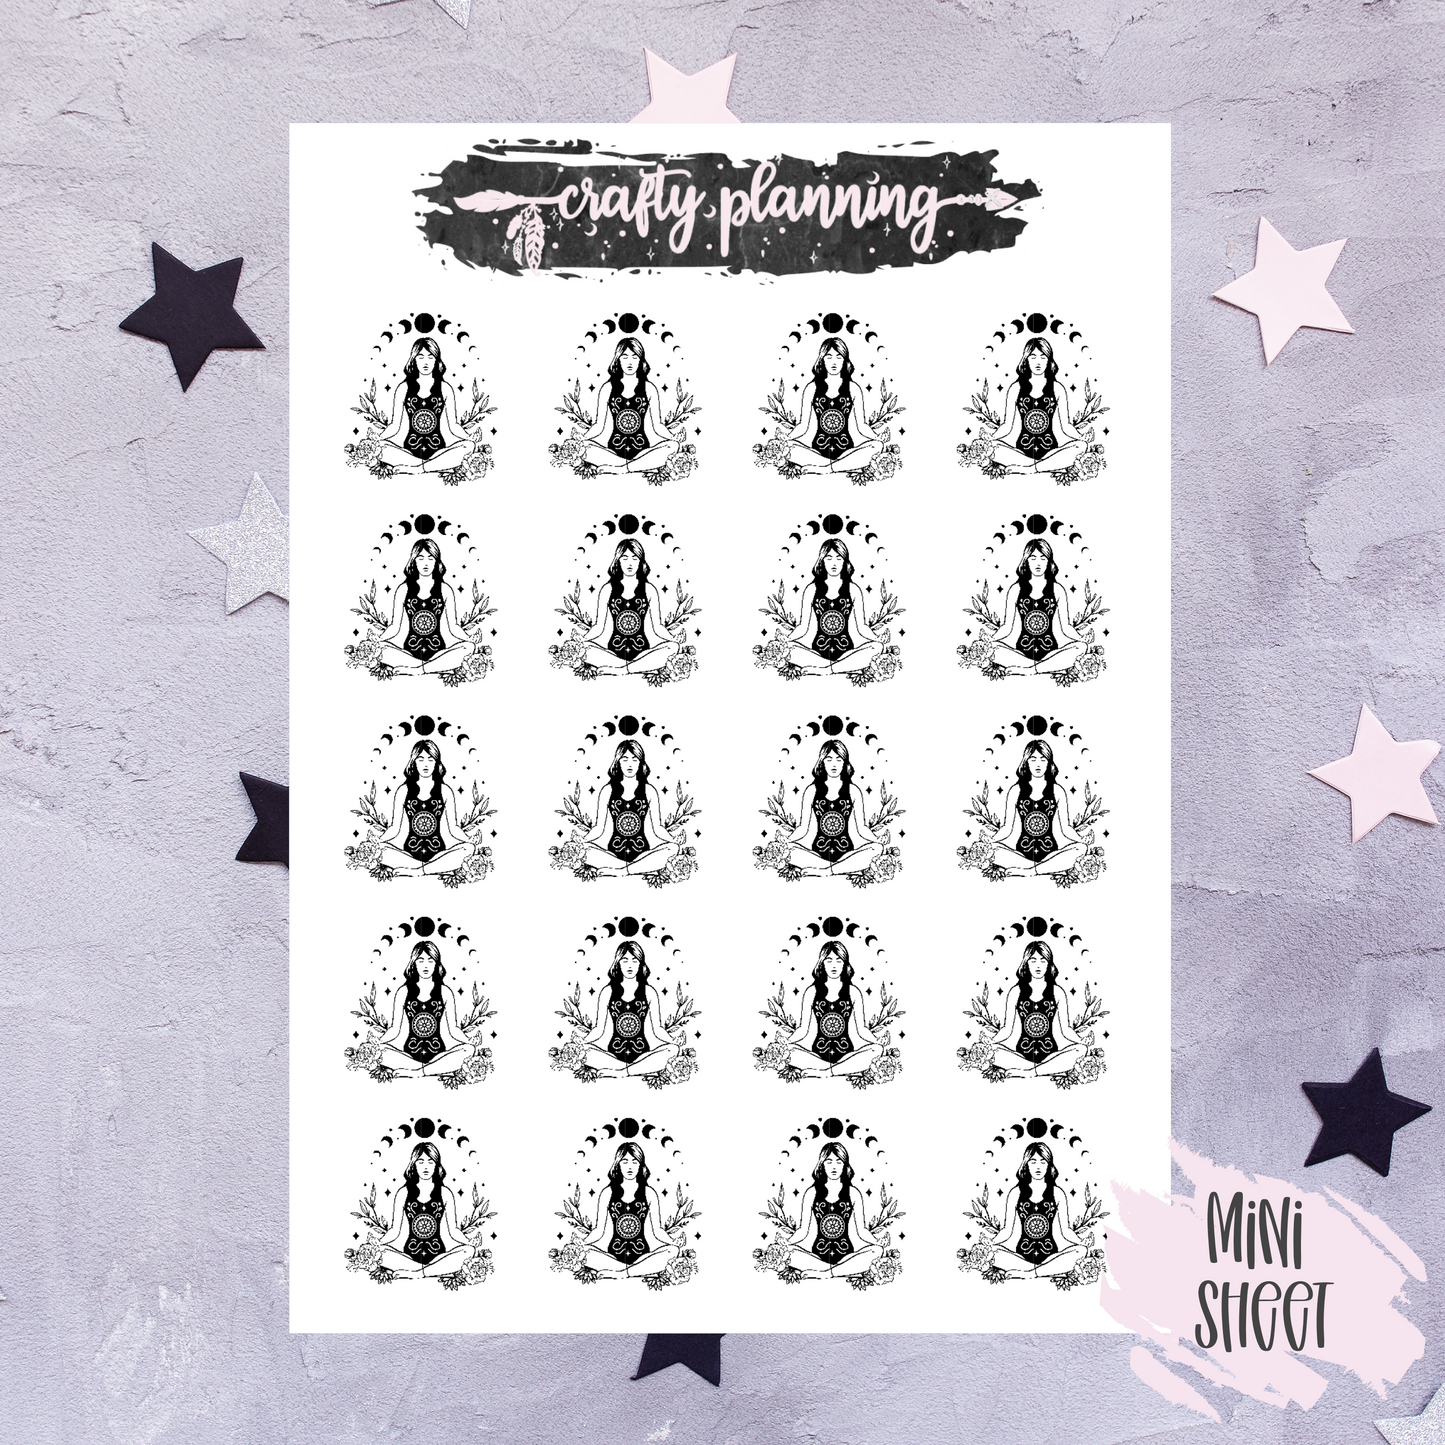 Yoga Stickers, Meditation Stickers, Gothic Stickers, Goth Stickers, Black and White Stickers, Dark & Moody, Planner Stickers